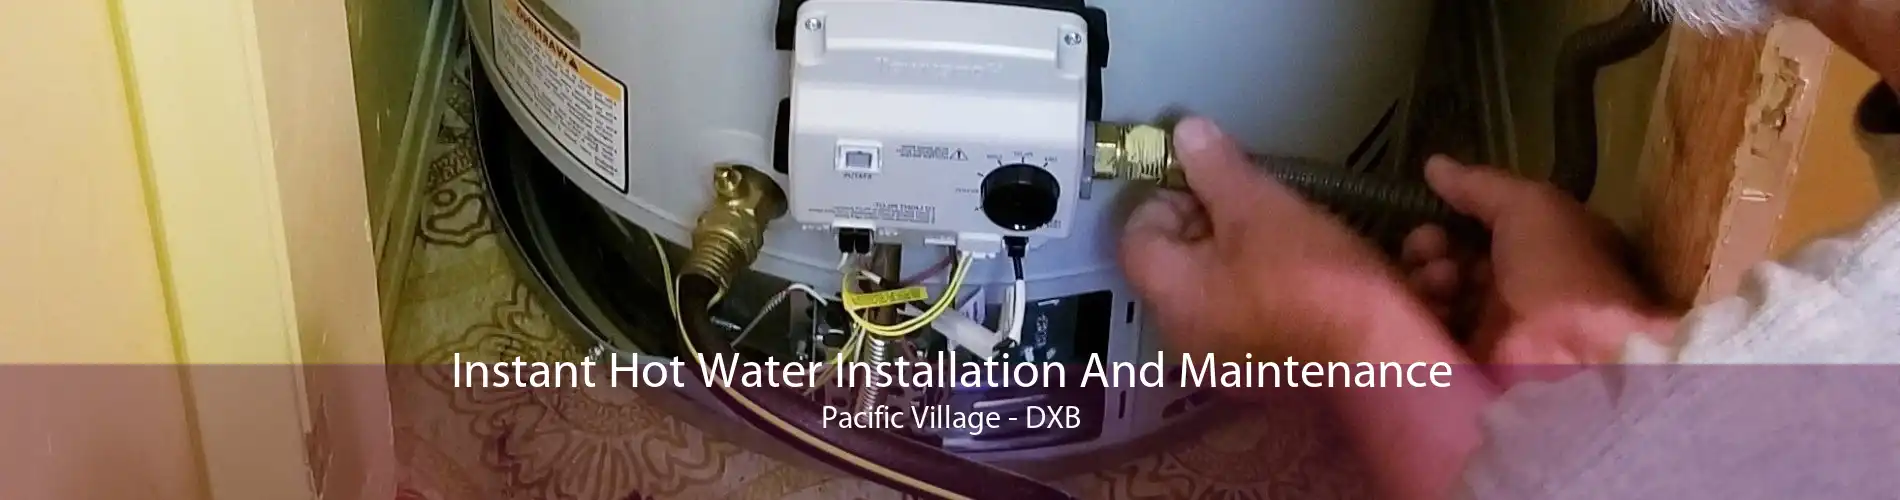 Instant Hot Water Installation And Maintenance Pacific Village - DXB